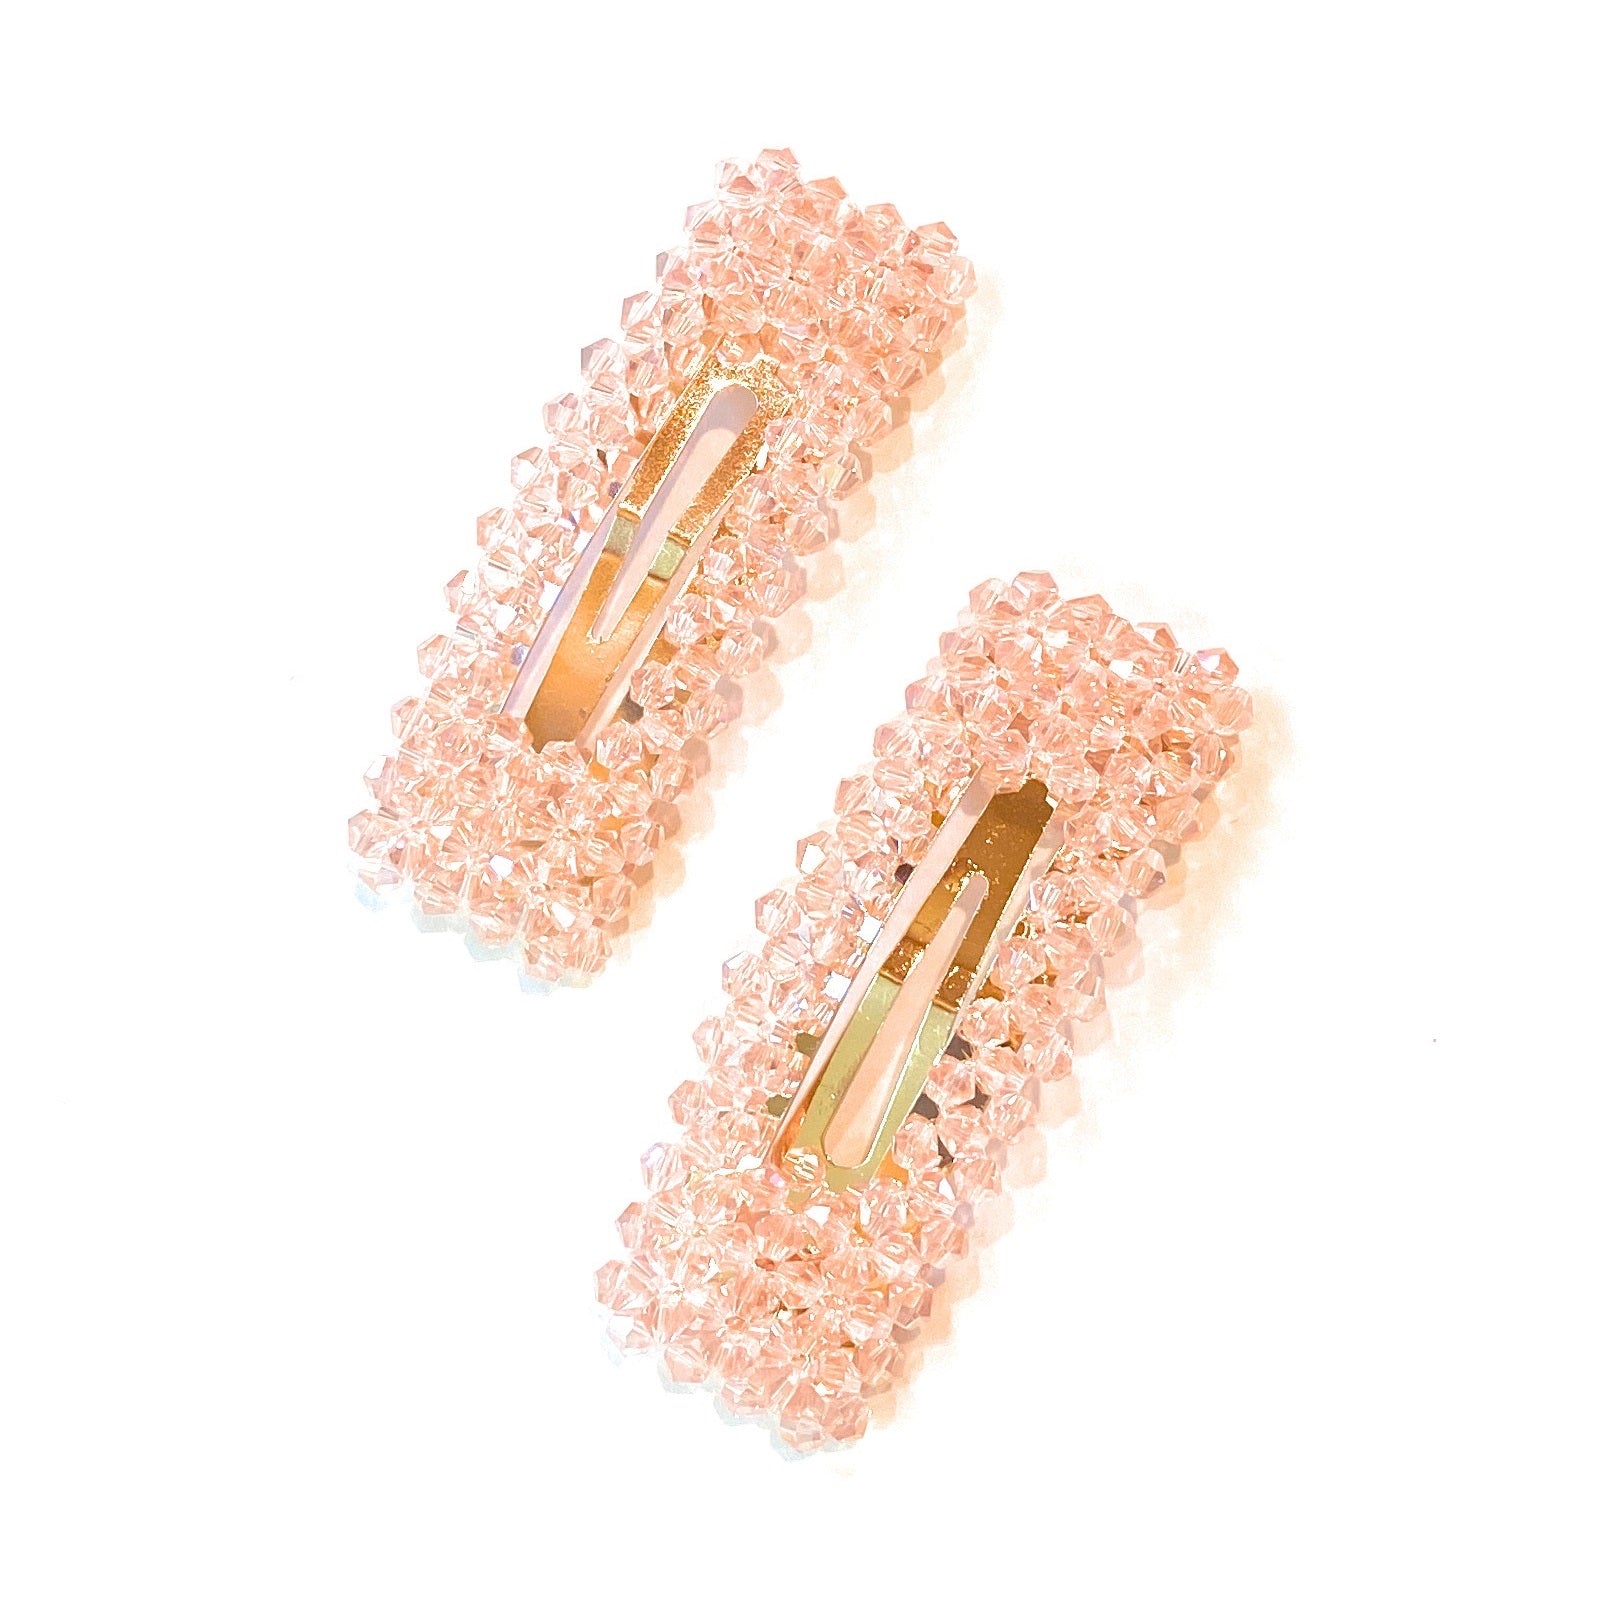 Mia Beauty Snip Snaps in rectangle shape with pink beads